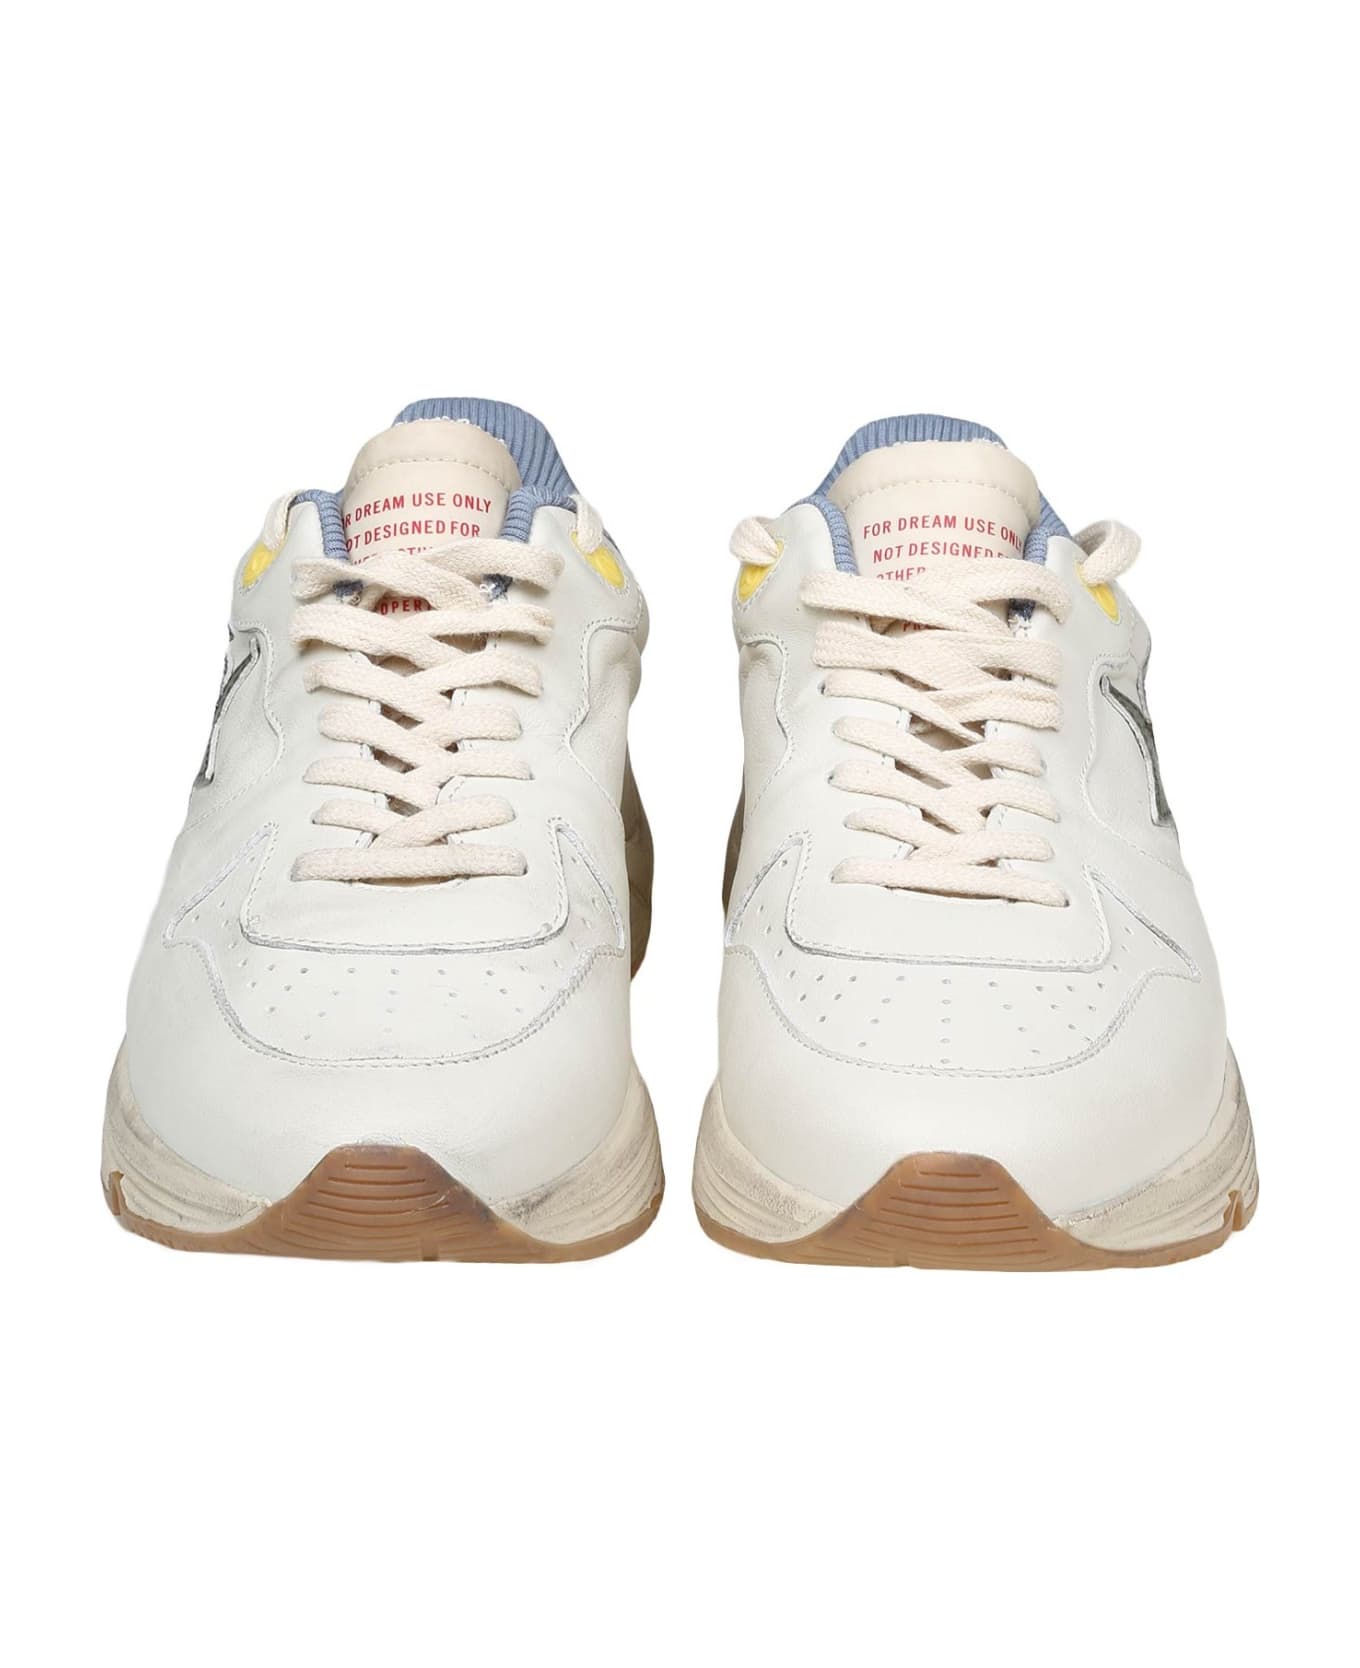 Golden Goose Running Sole Padded Sneakers - White/Green/Powder Blue